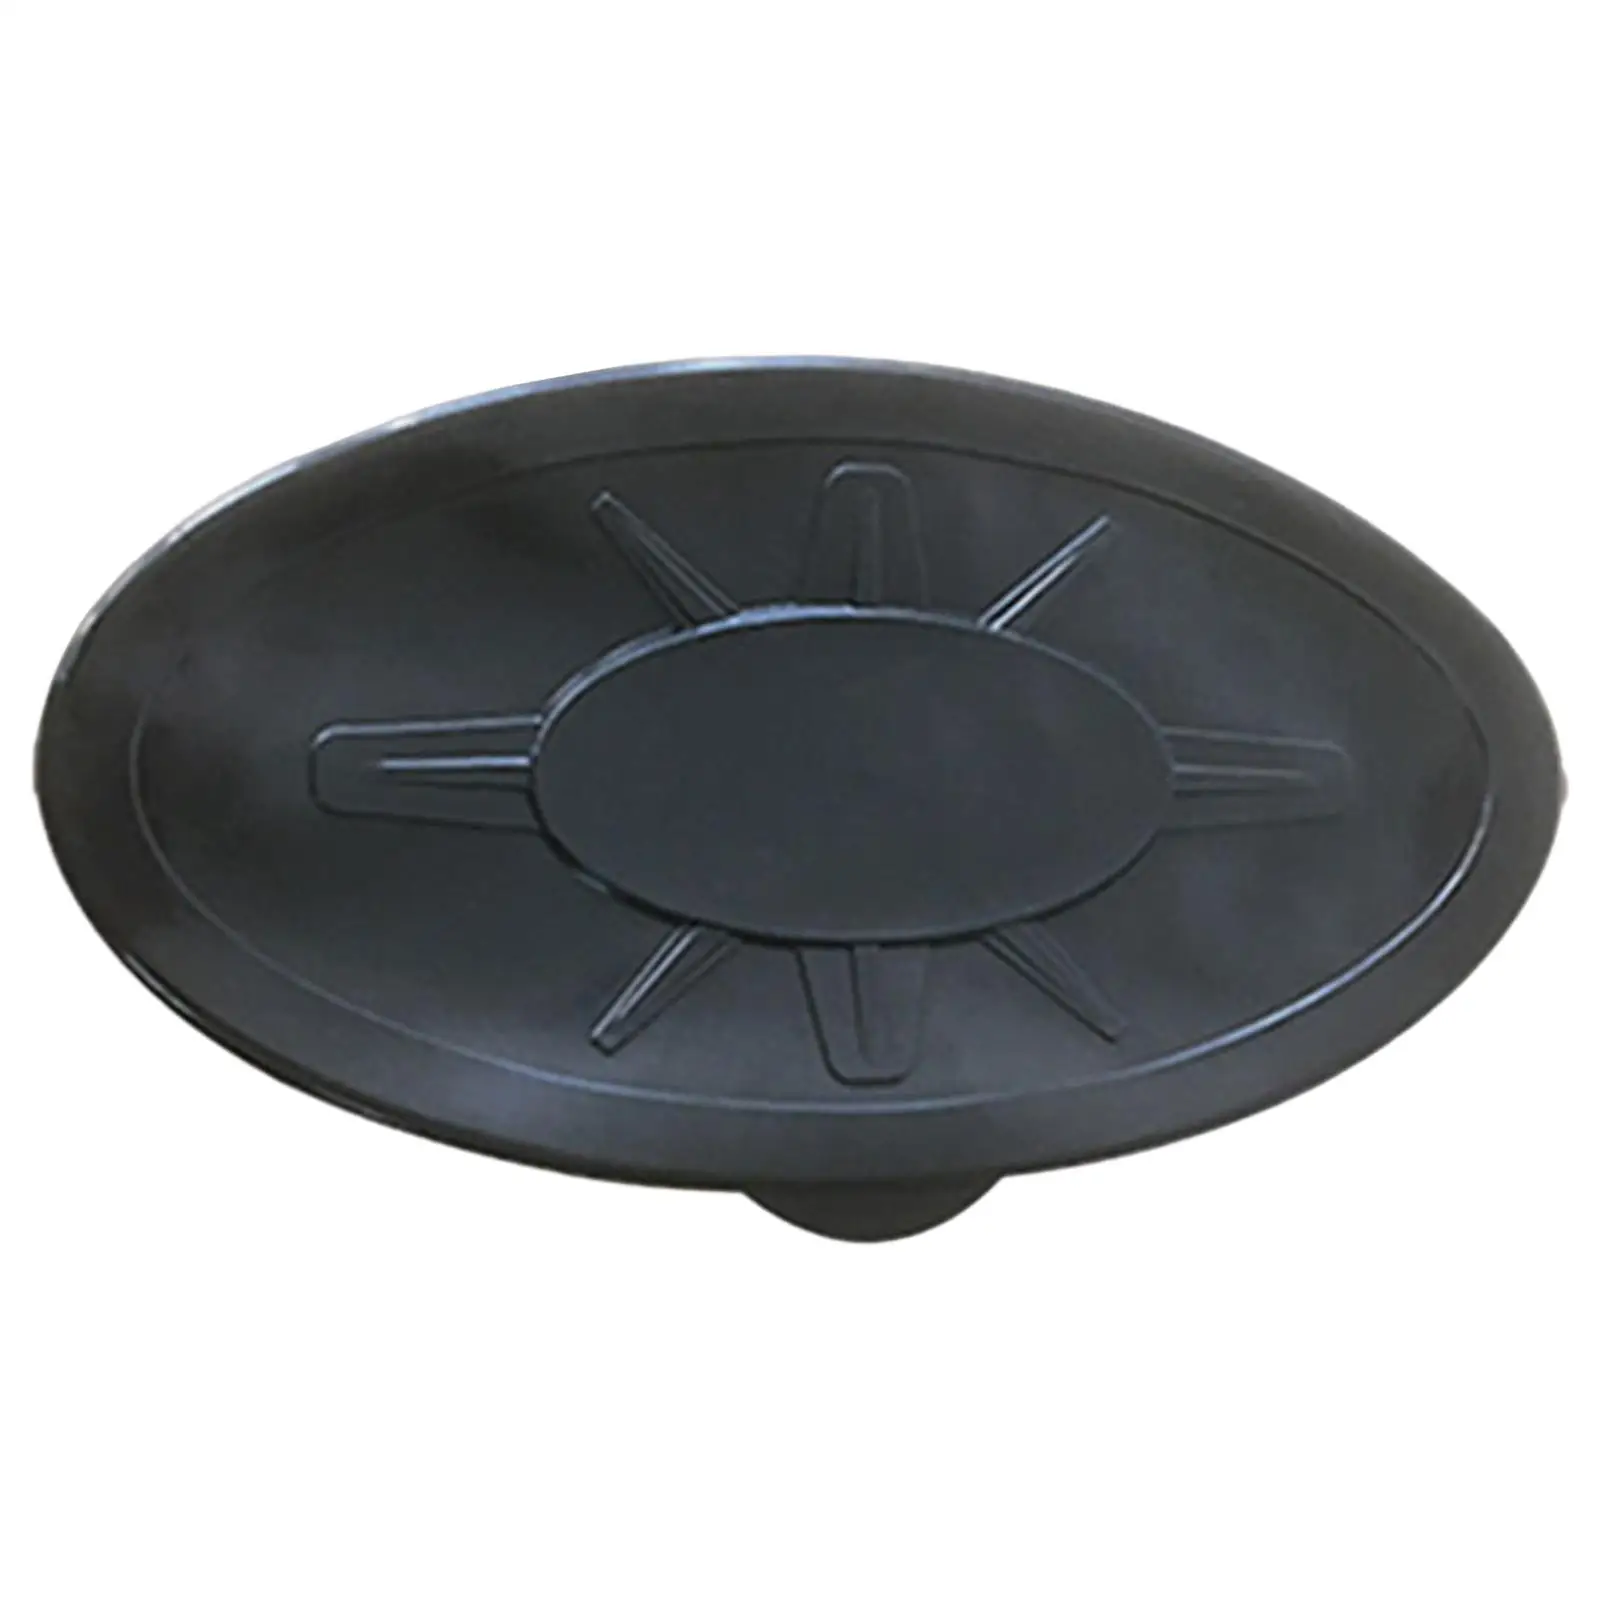 Kayak Hatches Boat Sealing Hatch Plate Replacement Hatches for Boat Kayak Marine